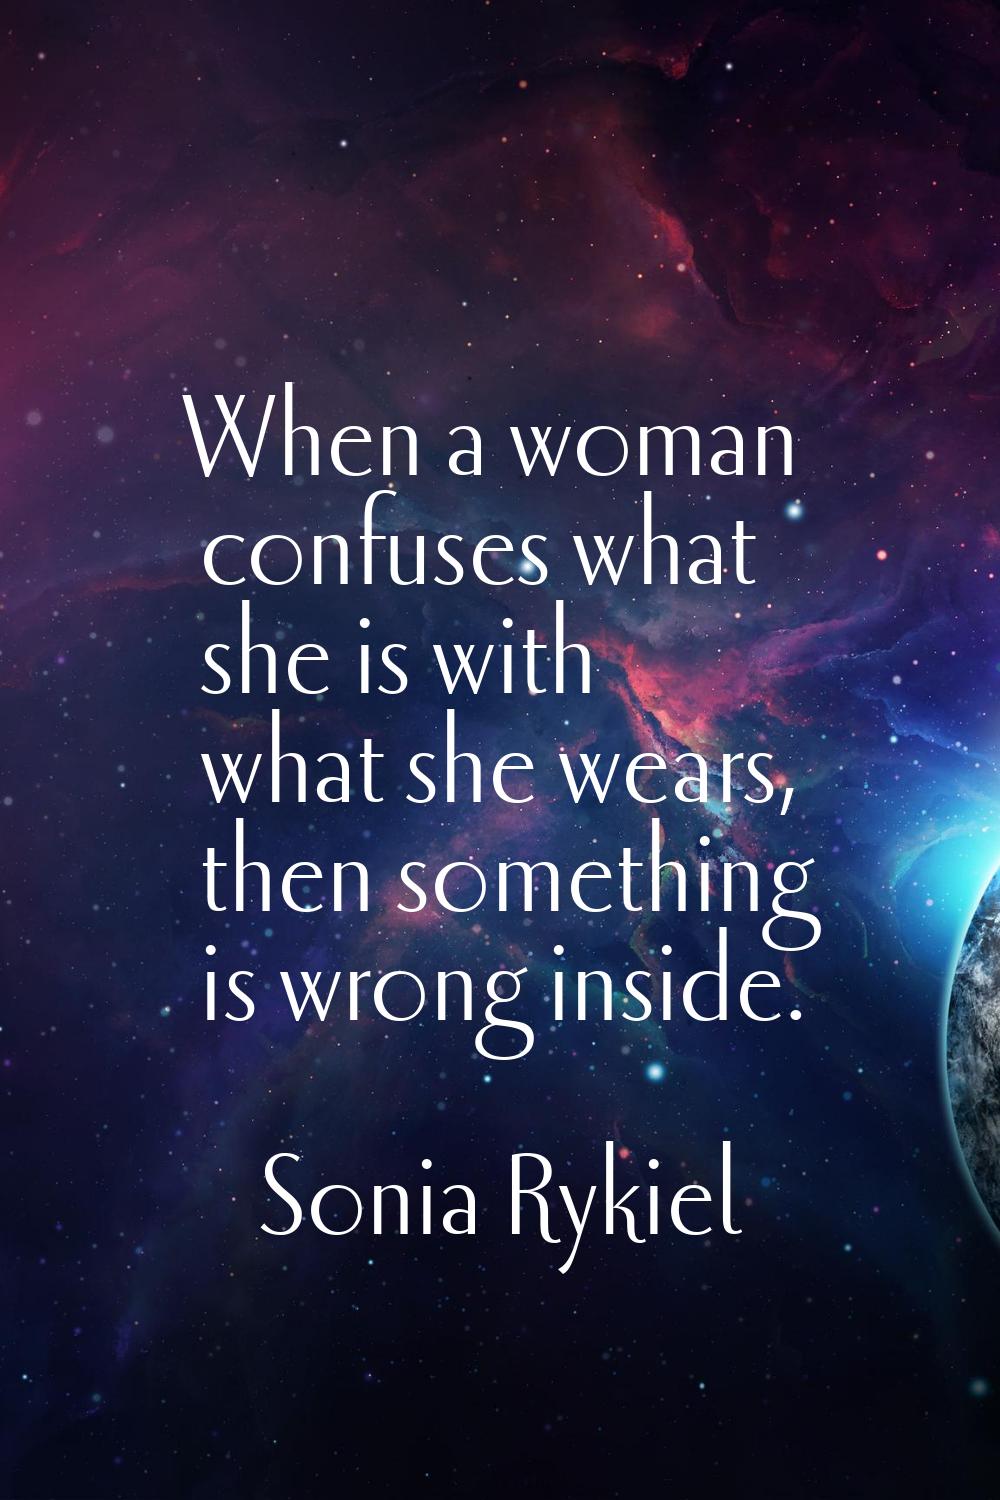 When a woman confuses what she is with what she wears, then something is wrong inside.